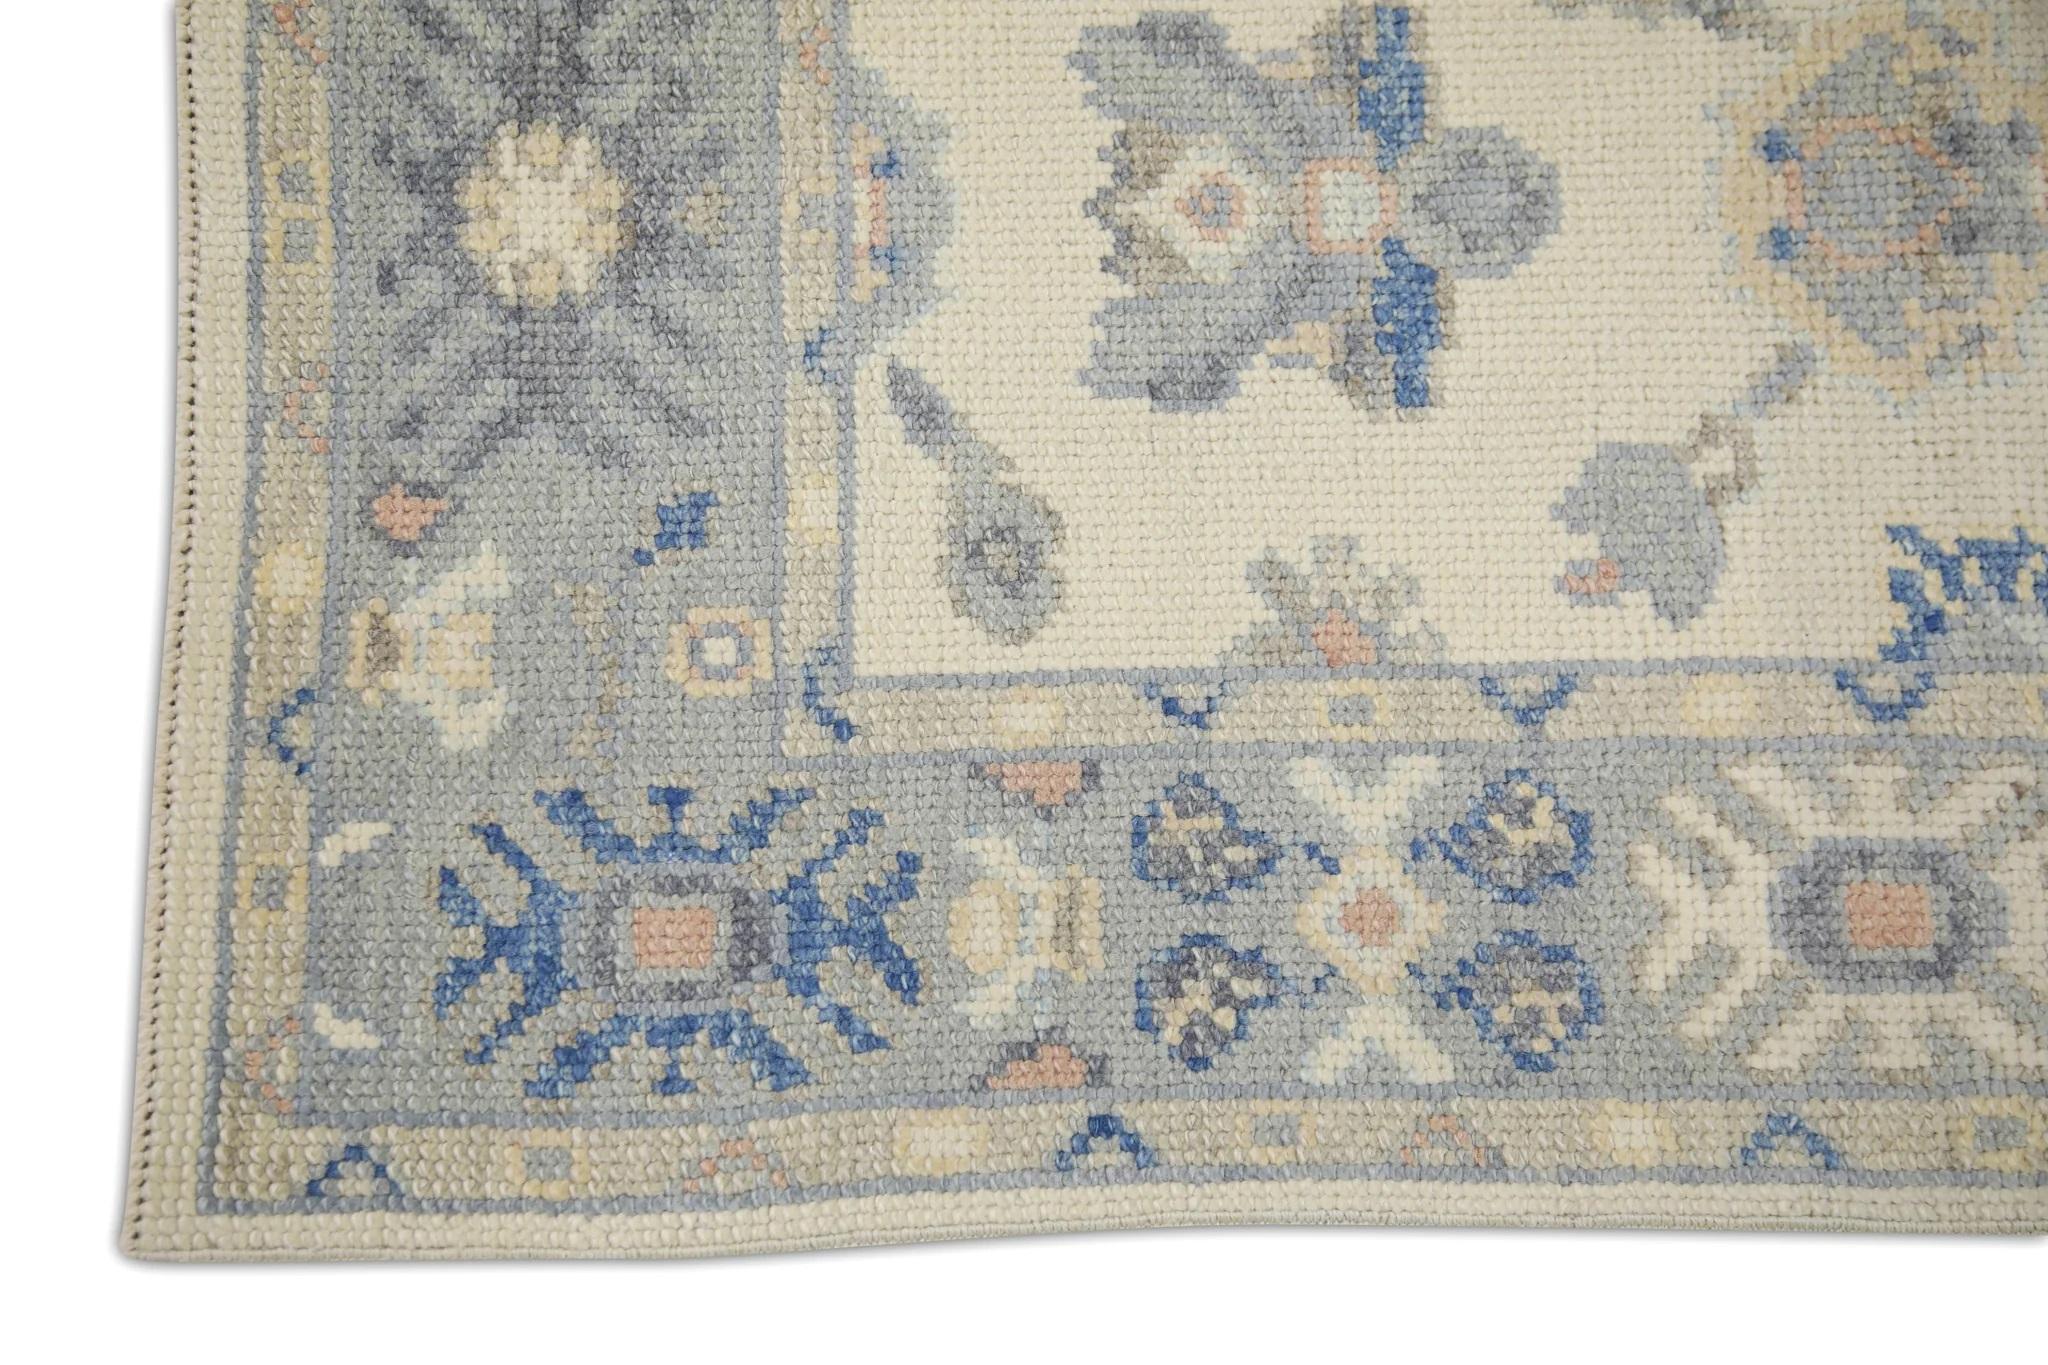 Vegetable Dyed Cream Handwoven Wool Turkish Oushak Rug in Blue Floral Pattern 2'6